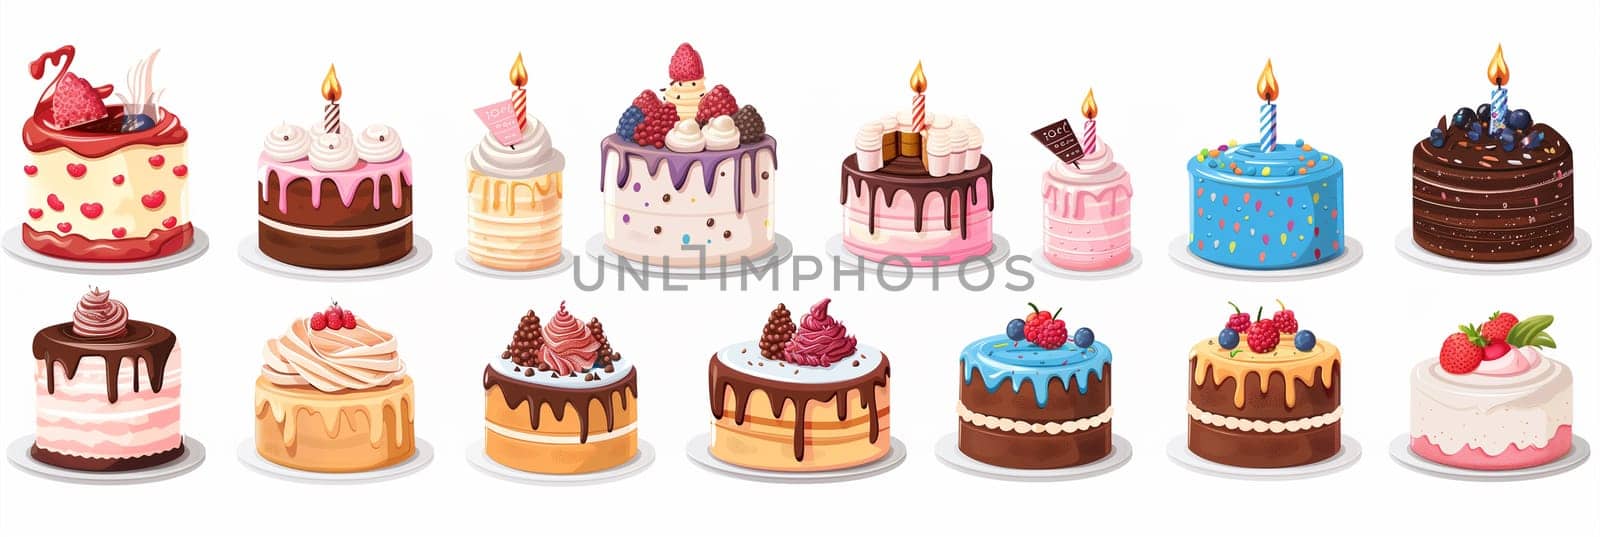 Several cakes with lit candles on top.